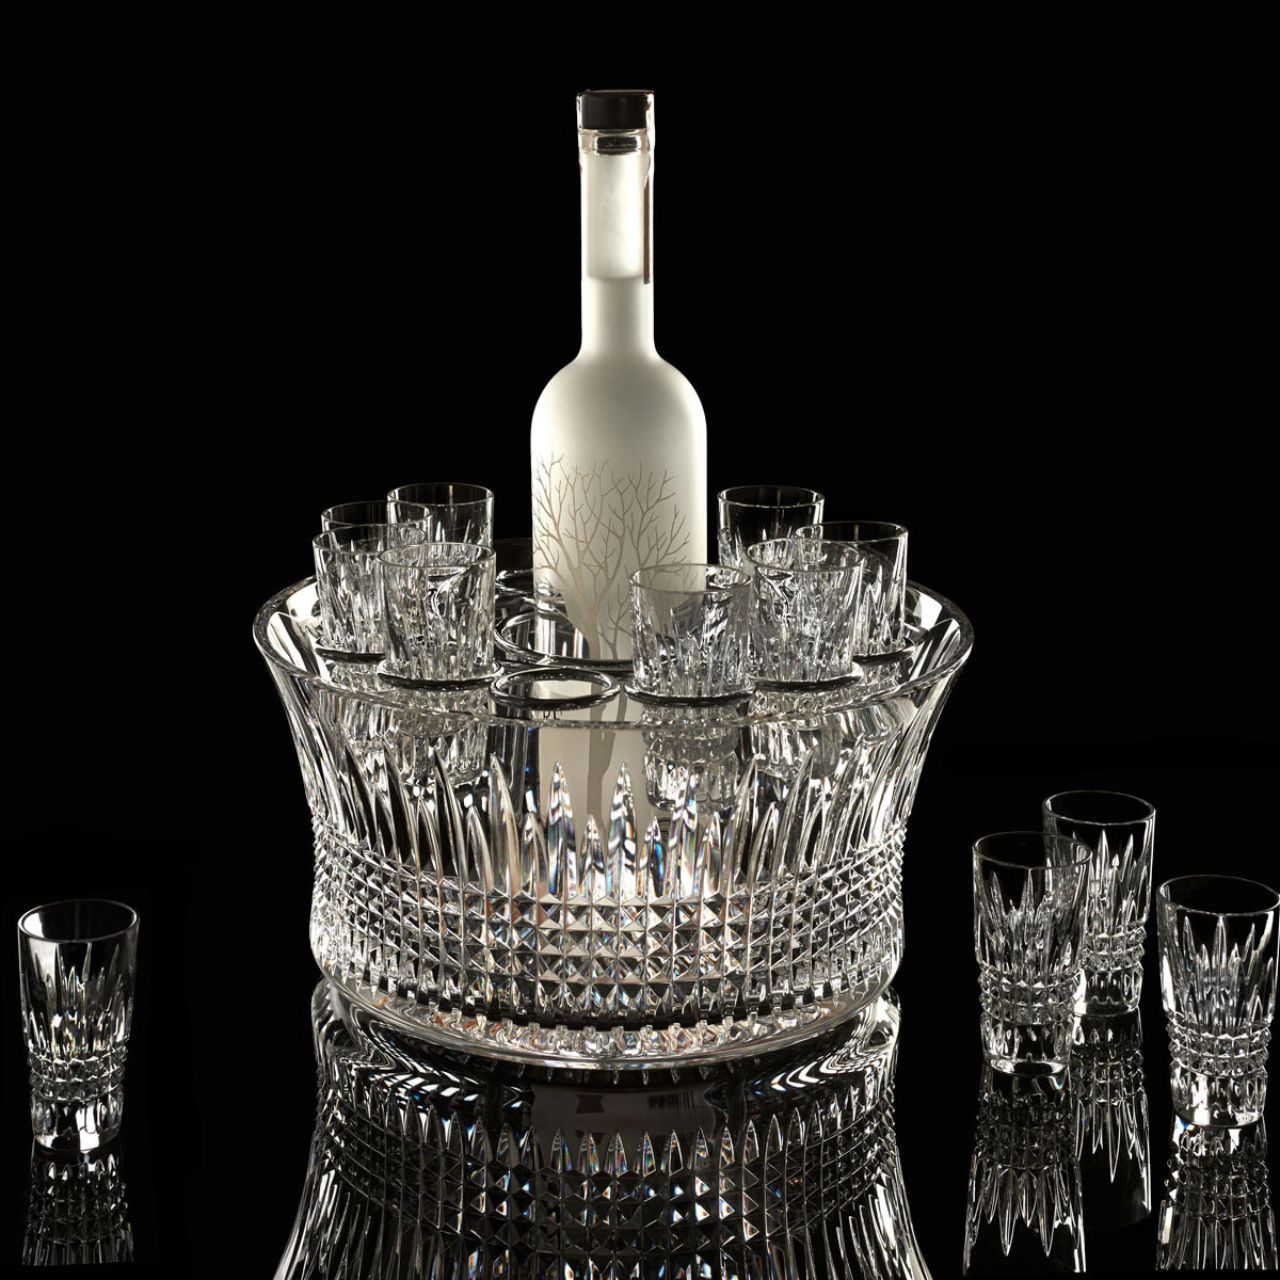 Waterford Crystal Lismore Diamond Bowl Vodka Chill Set 30cm  The Lismore Diamond pattern is a strikingly modern reinvention of the Waterford classic : characterized by intricate diamond cuts rendered in radiant fine crystal.